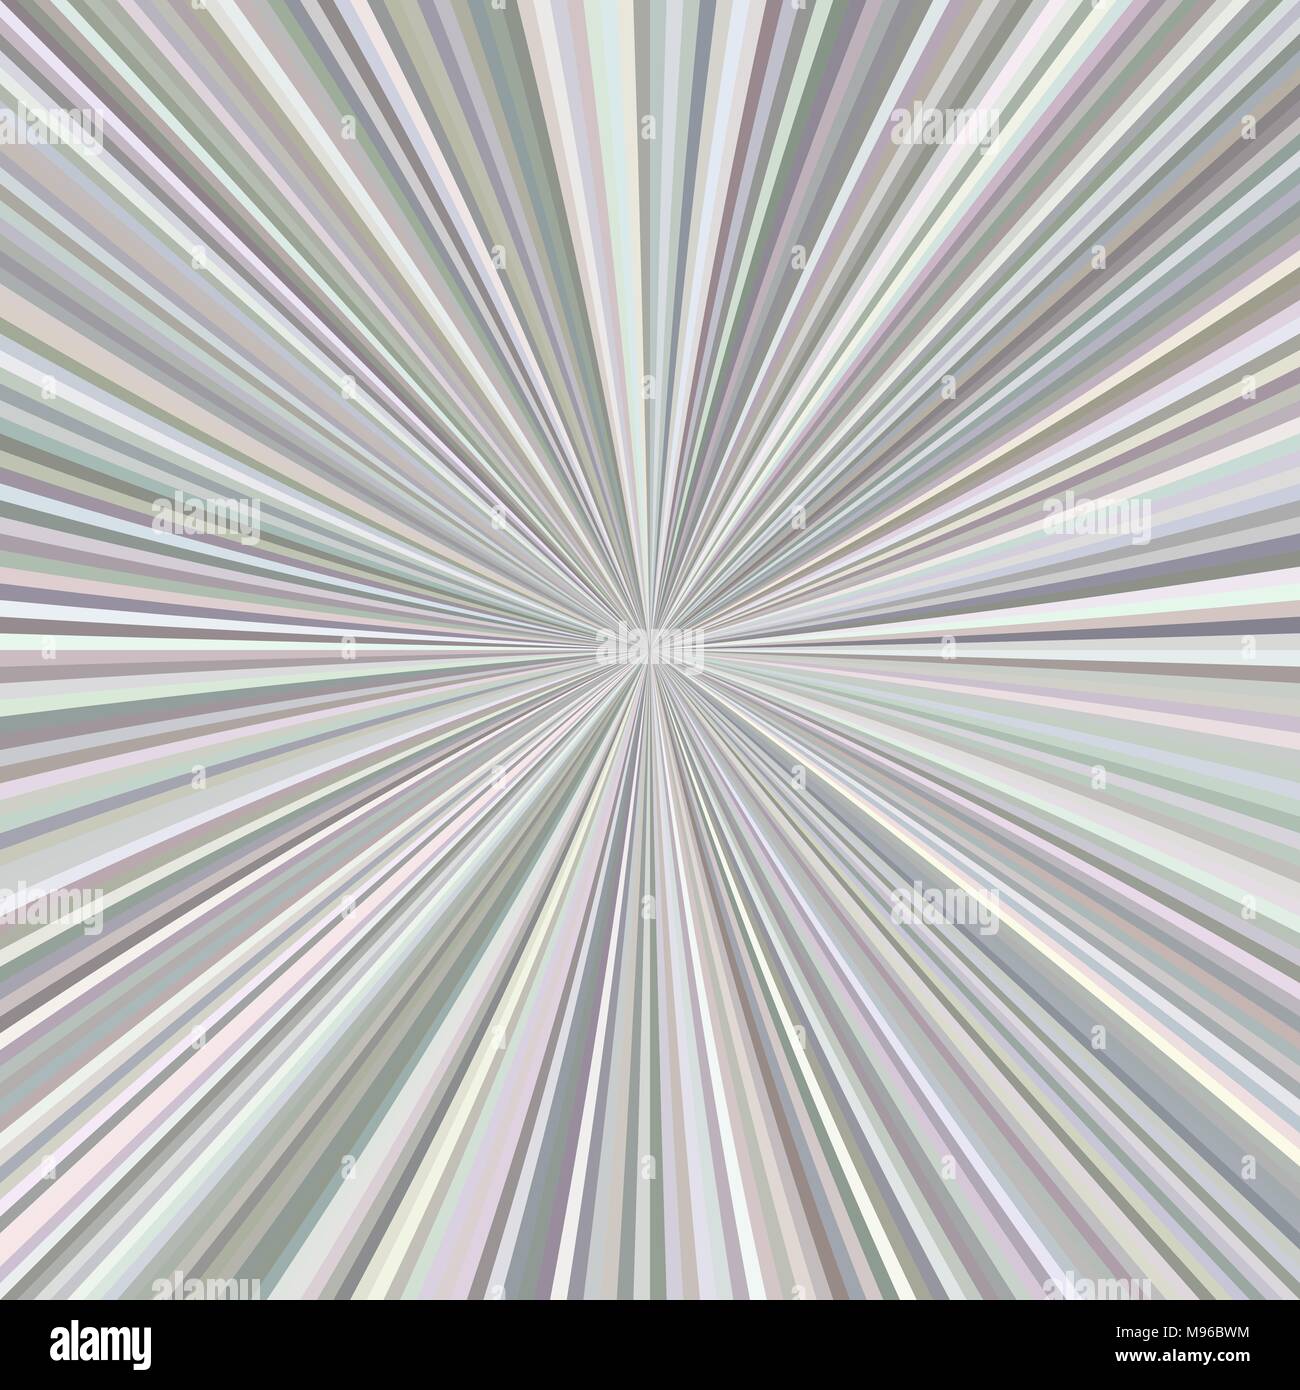 Grey abstract starburst background Stock Vector